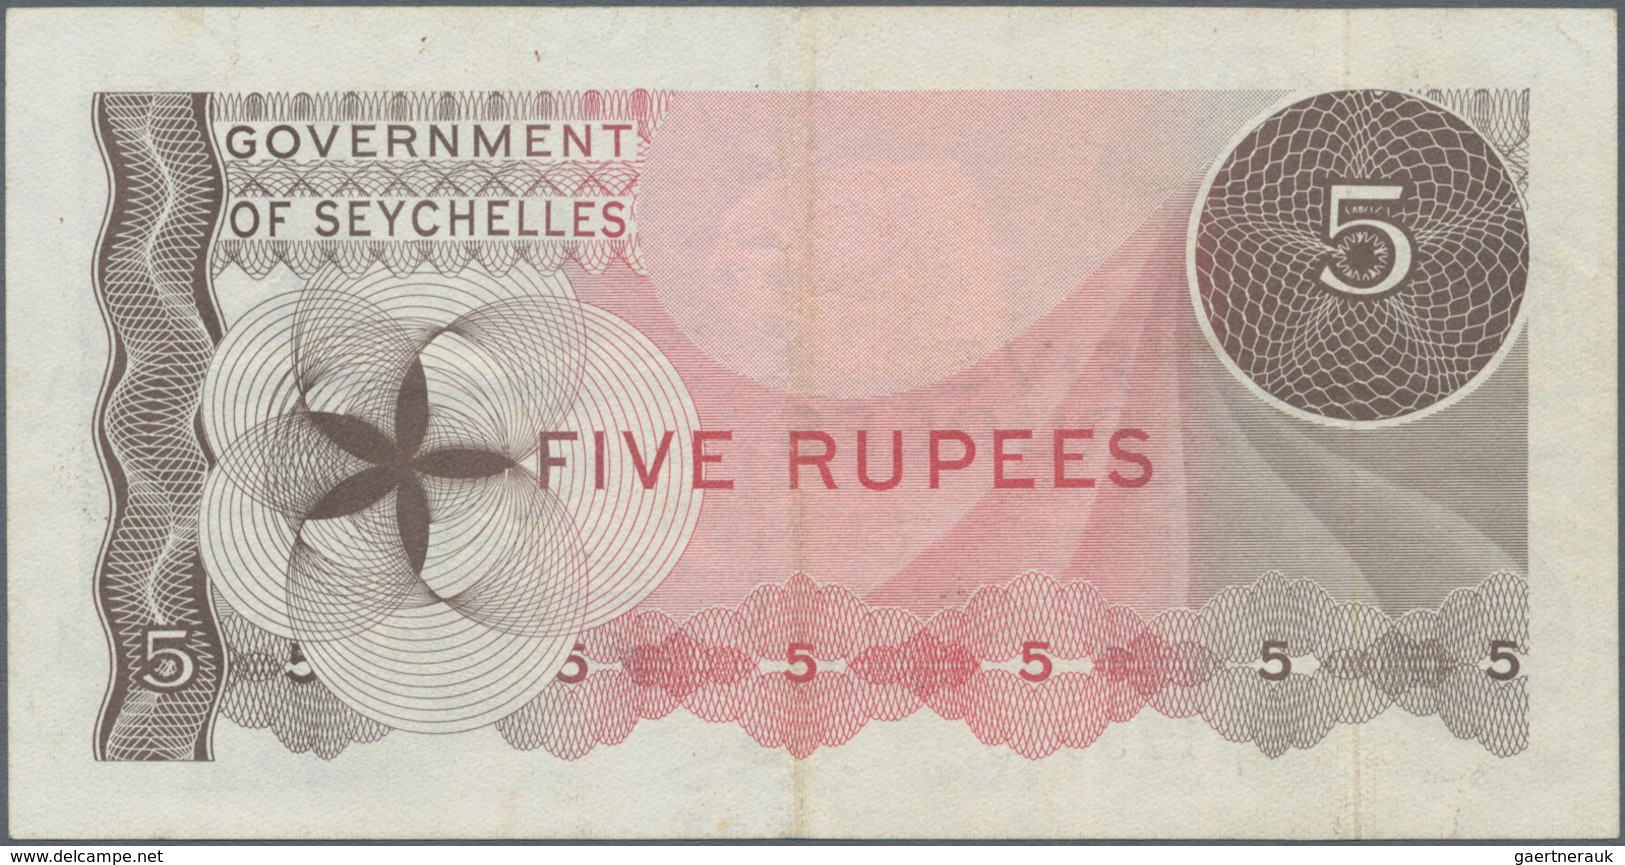 Seychelles / Seychellen: Government Of Seychelles 5 Rupees 1968, P.14, Very Popular Banknote In Nice - Seychelles